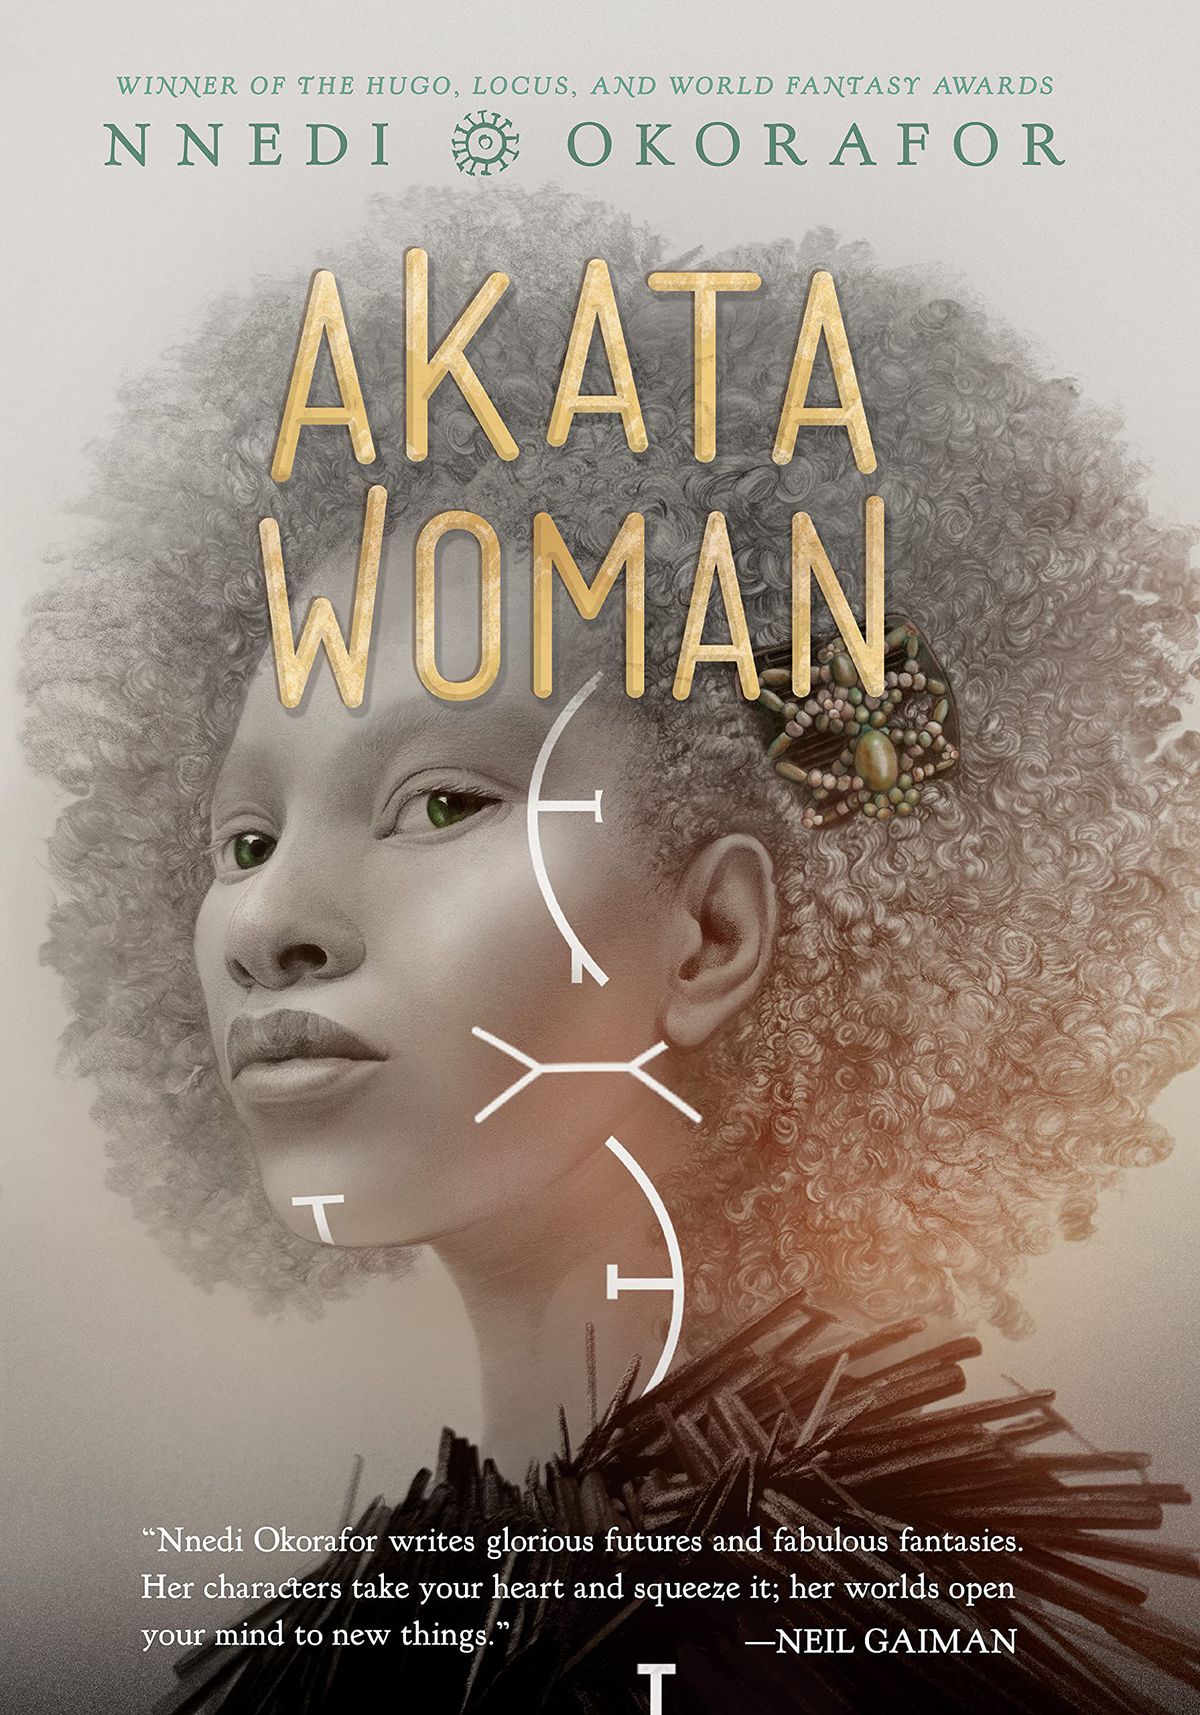 The cover for Akata Woman showing the semi-profile of a woman with an afro, illustrated in grayscale